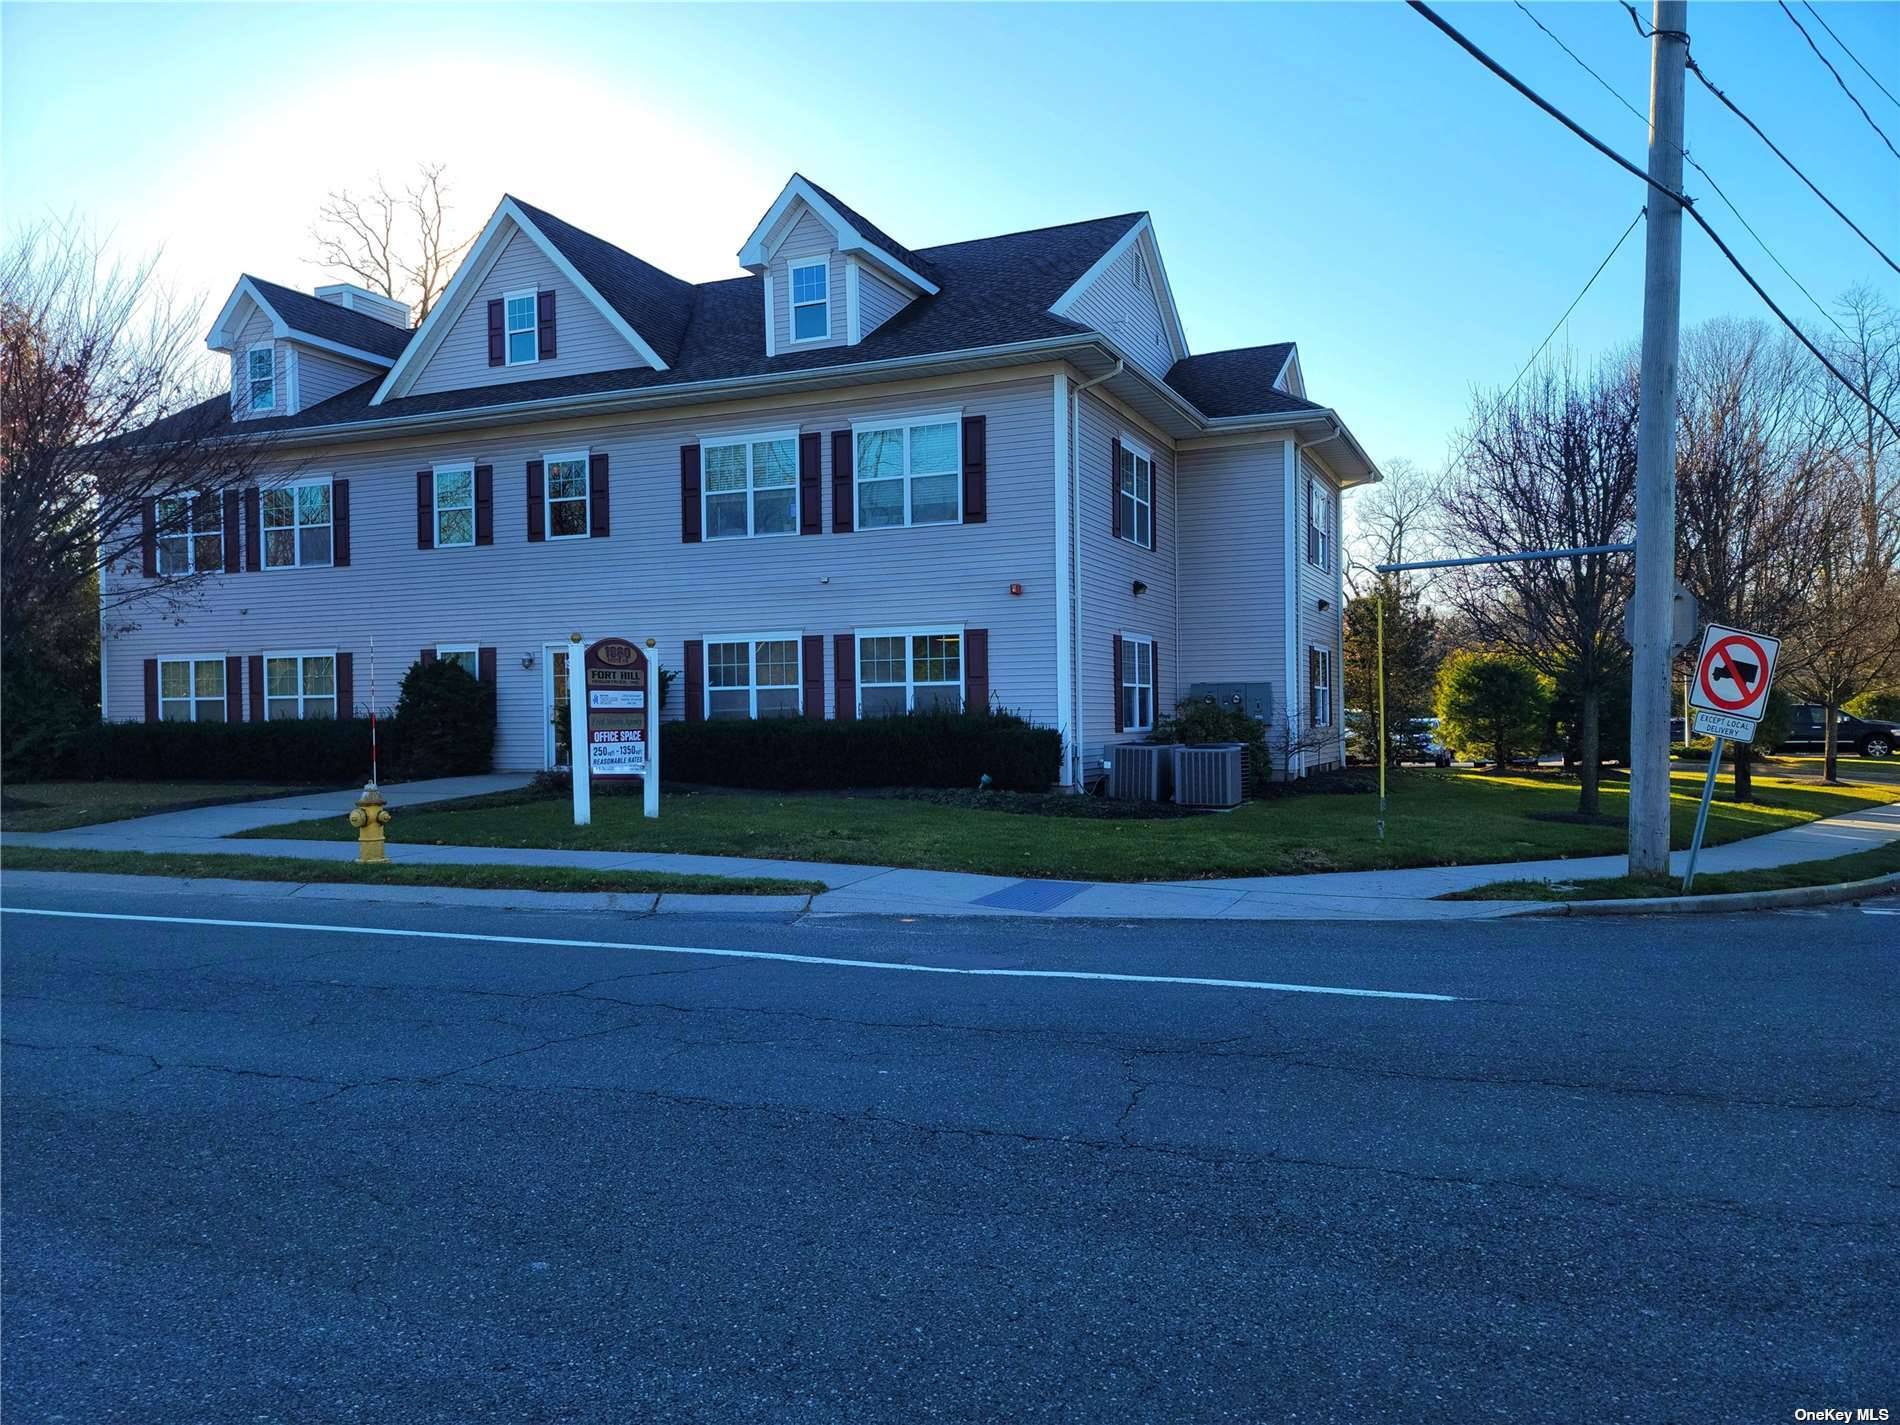 FREESTANDING TWO STORY BUILDING FOR SALE LOCATED ON THE CORNER OF ROUTE 112 AND HAWKINS PATH.